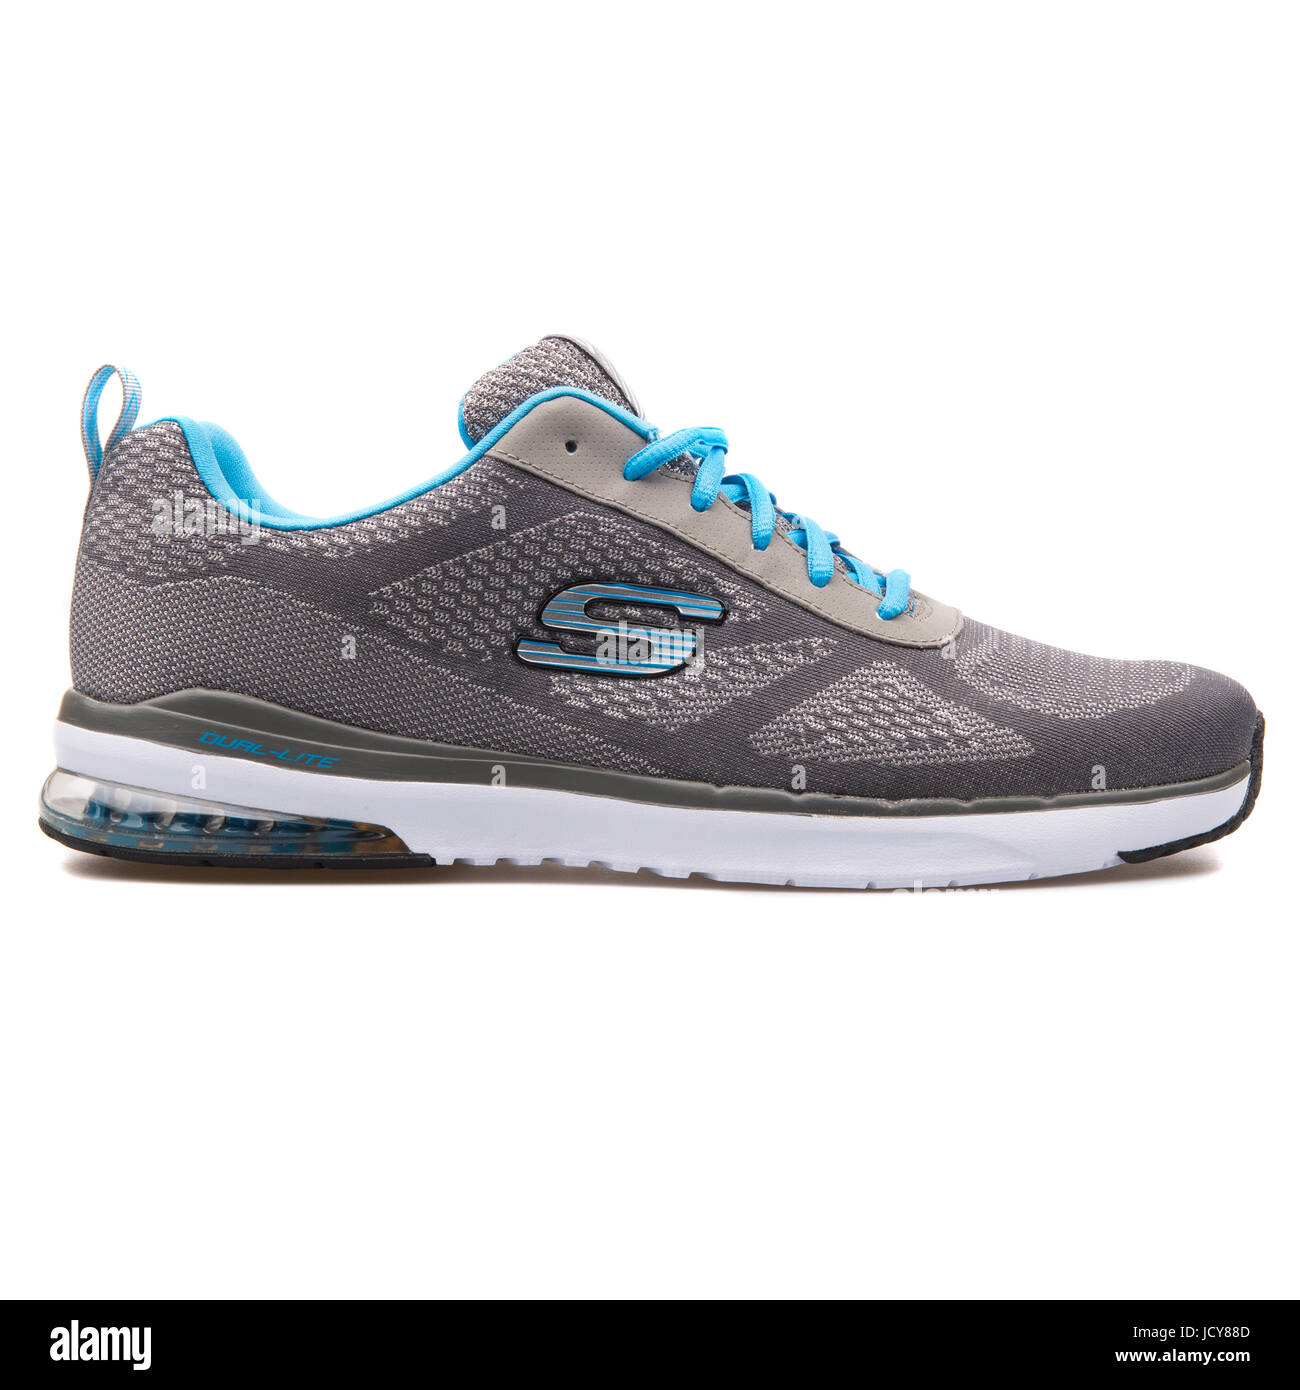 skechers shoes stock